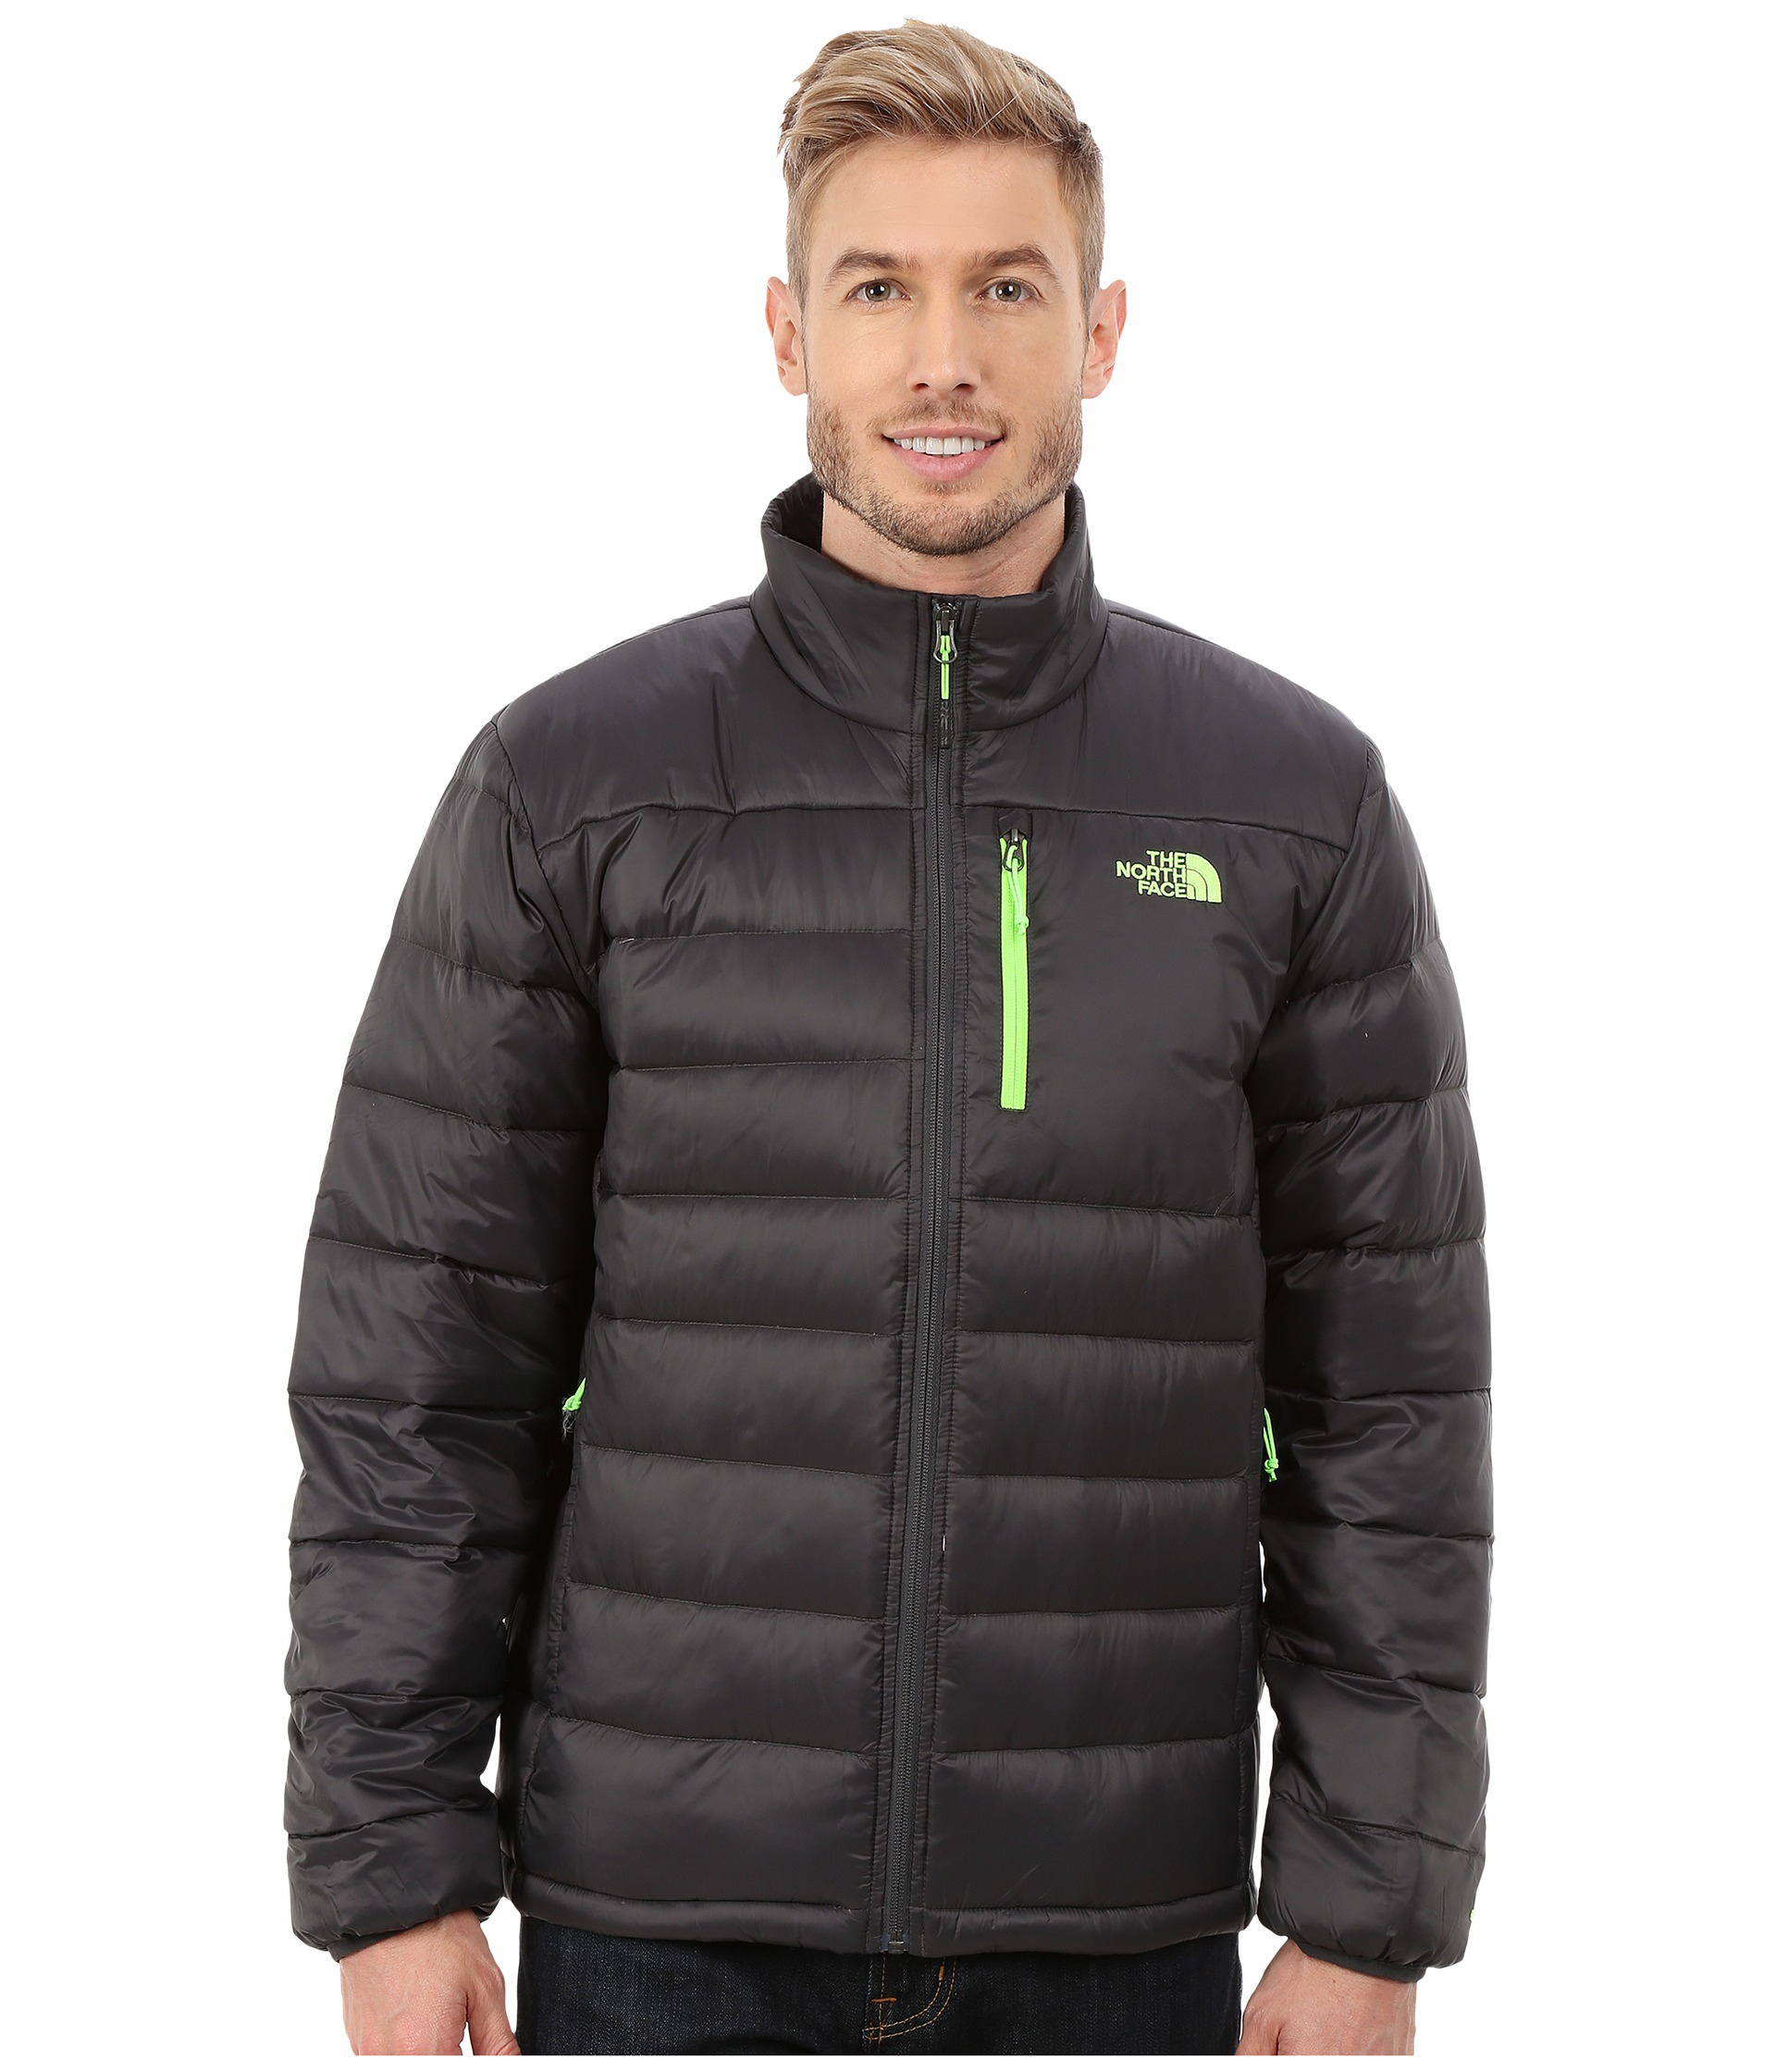 Lyst - The North Face Aconcagua Jacket in Black for Men